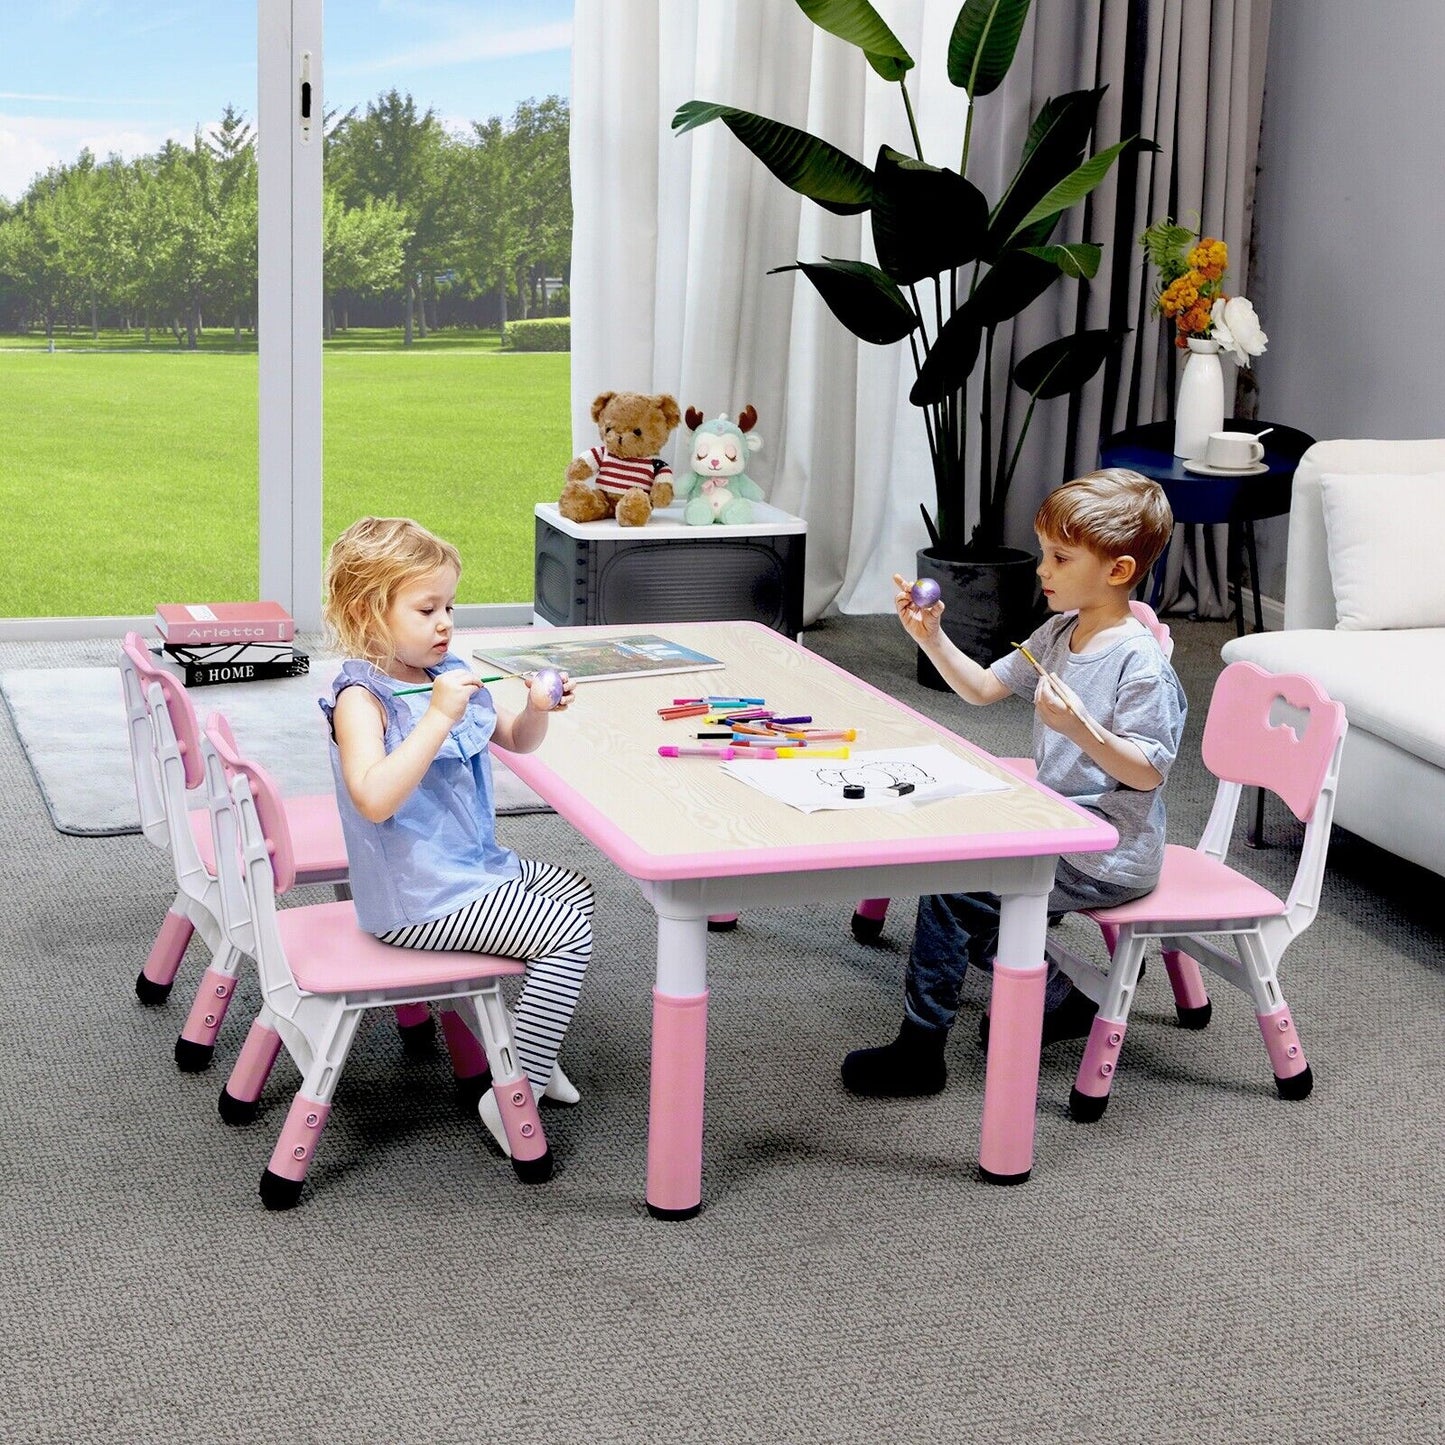 Arlopu Kids Table and 4 Chairs Set, Adjustable Height, Ideal for Arts & Crafts, Snack Time, Homeschooling, Homework